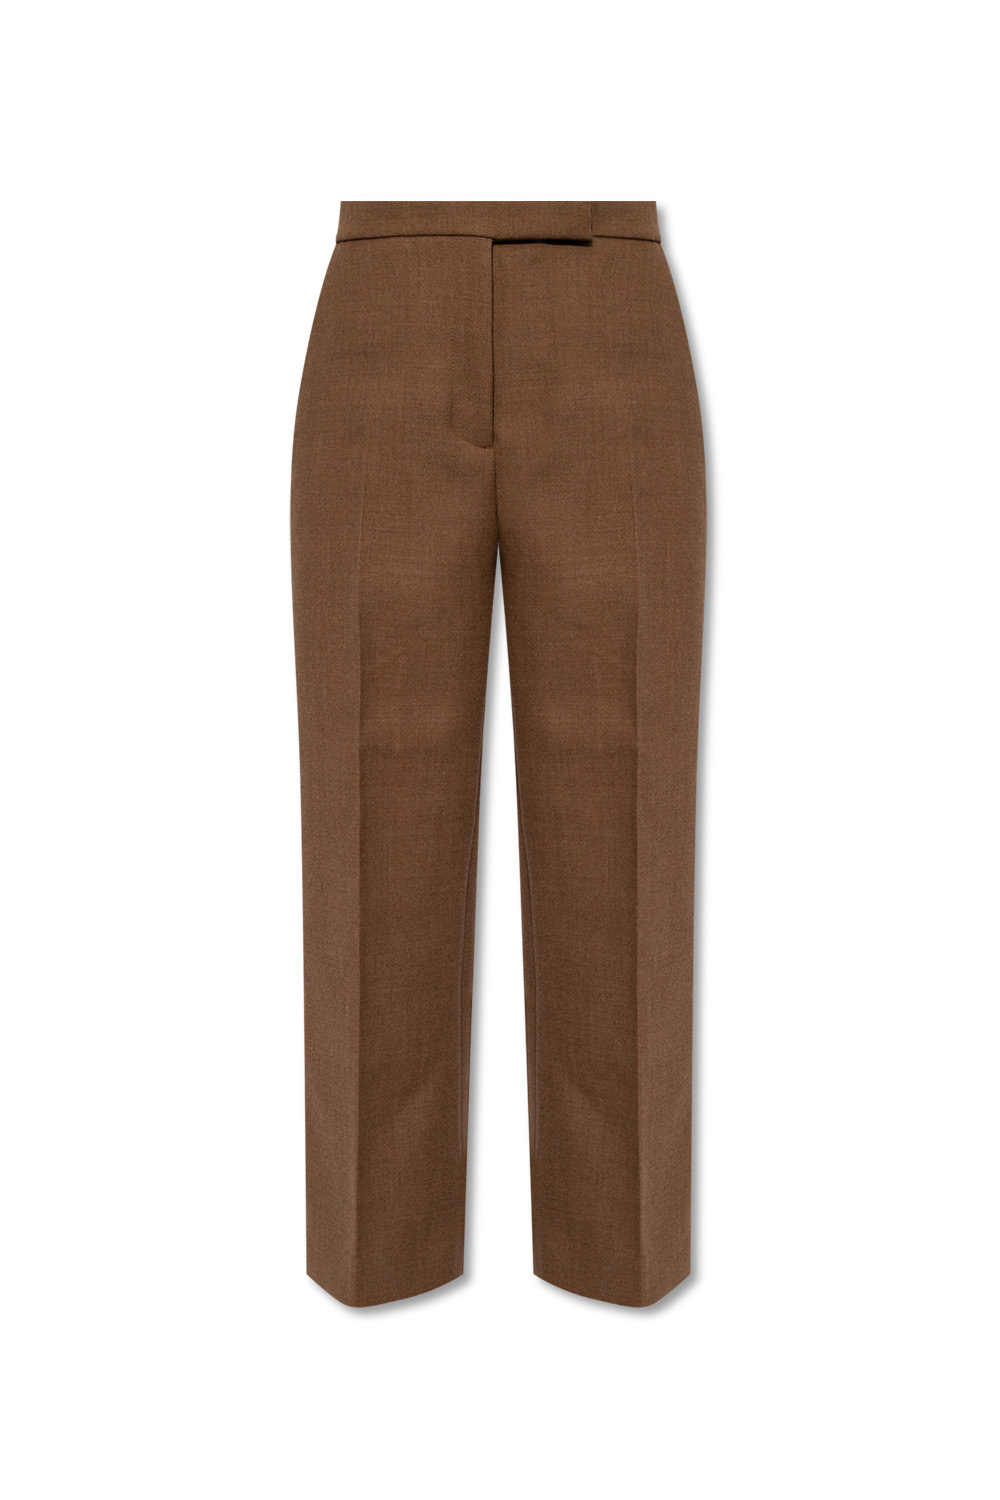 Toteme Wool trousers